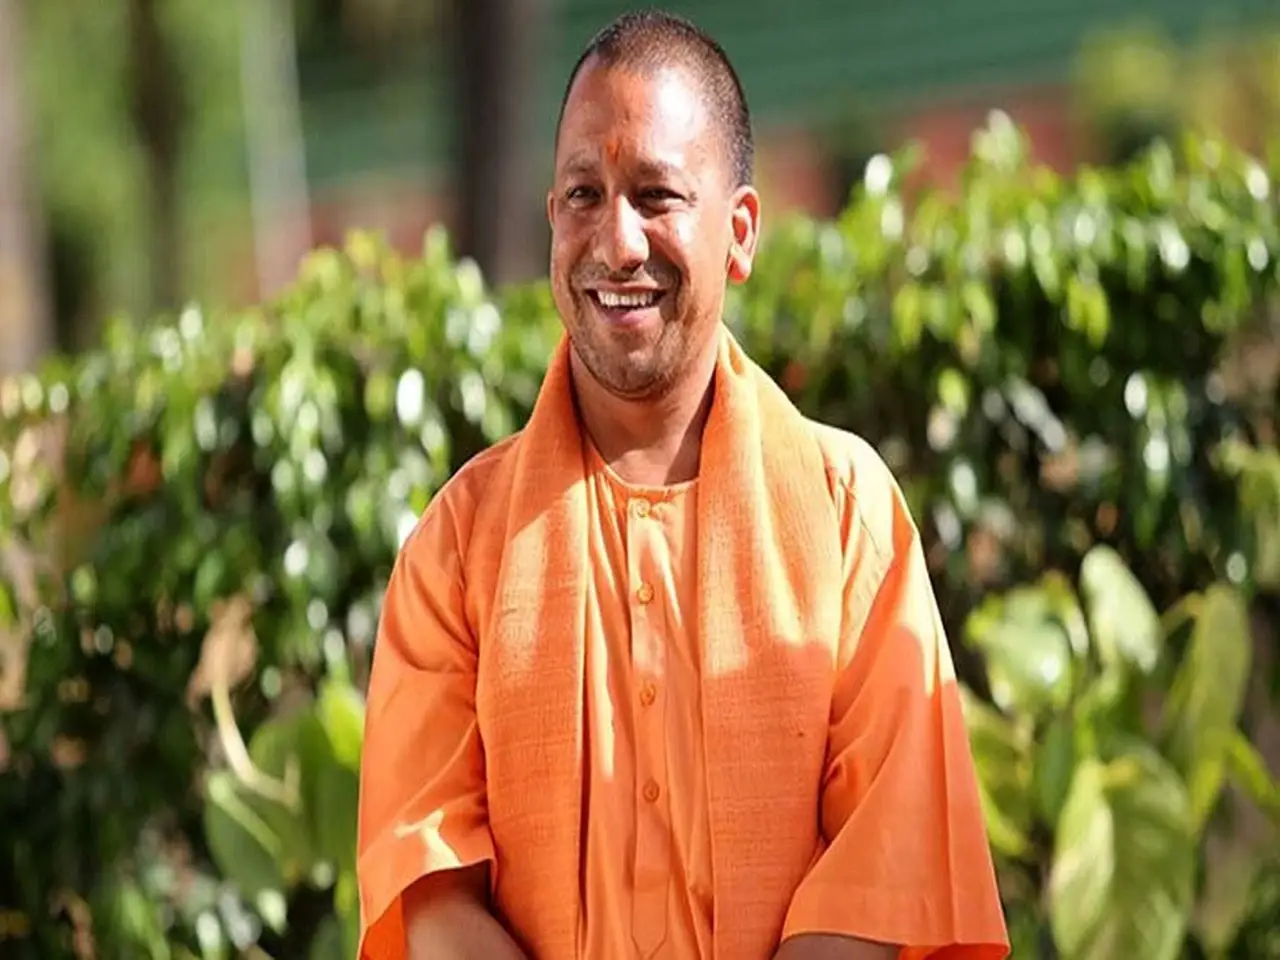 Yogi Adityanath said that "double engine government" of BJP supports "annadata" and the agricultural sector.